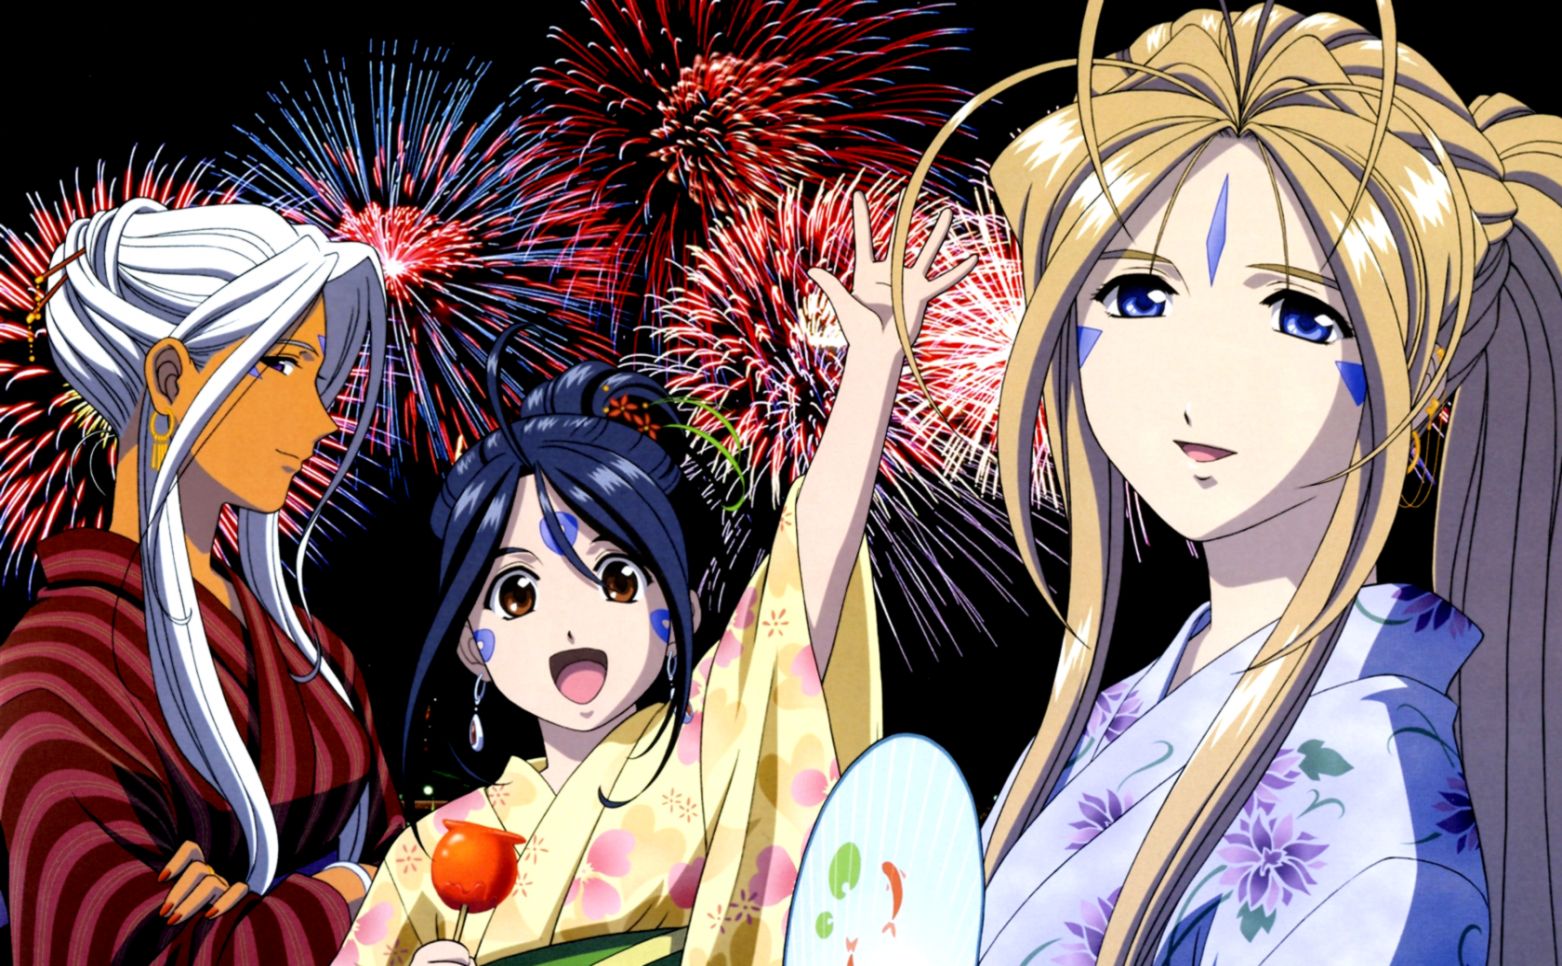 Firework Anime Happy New Year 2014 Wallpaper Posted - Happy New Year Anime - HD Wallpaper 